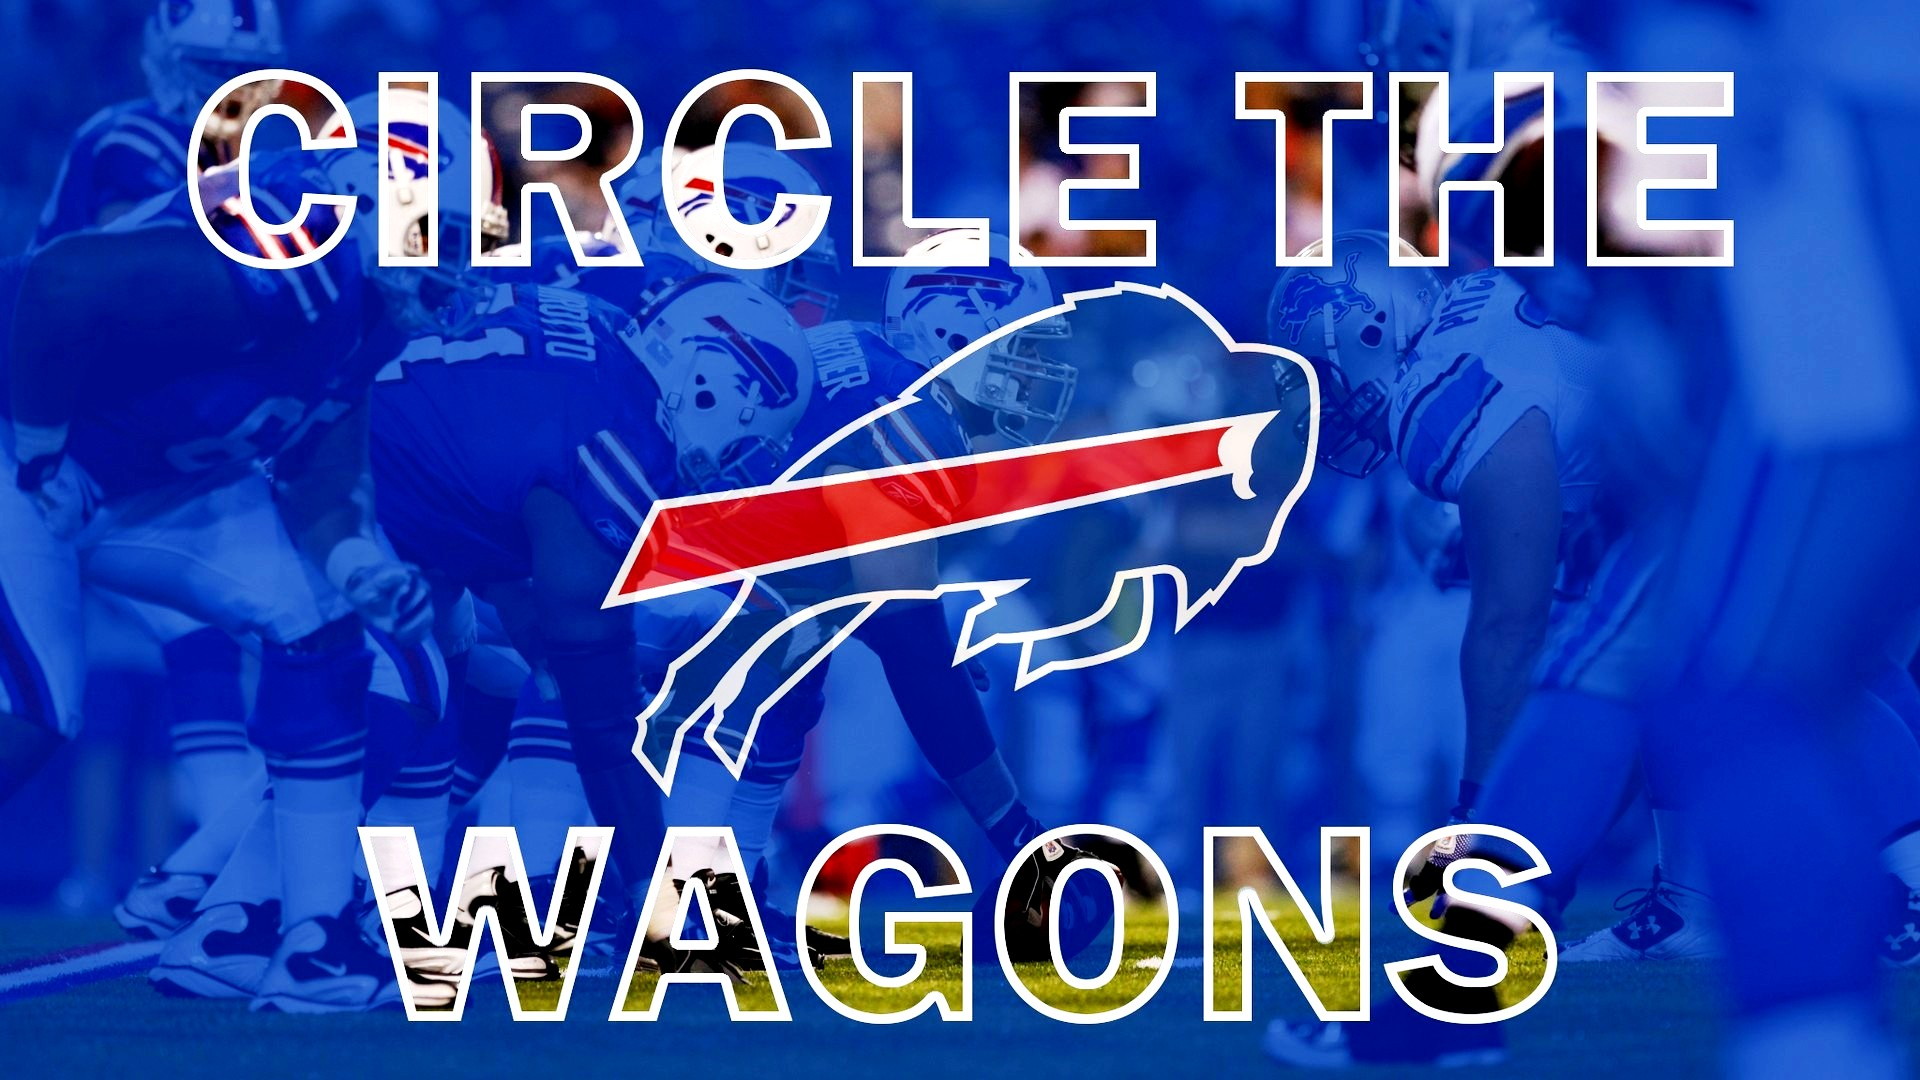 Wallpapers HD Buffalo Bills With high-resolution 1920X1080 pixel. You can use and set as wallpaper for Notebook Screensavers, Mac Wallpapers, Mobile Home Screen, iPhone or Android Phones Lock Screen